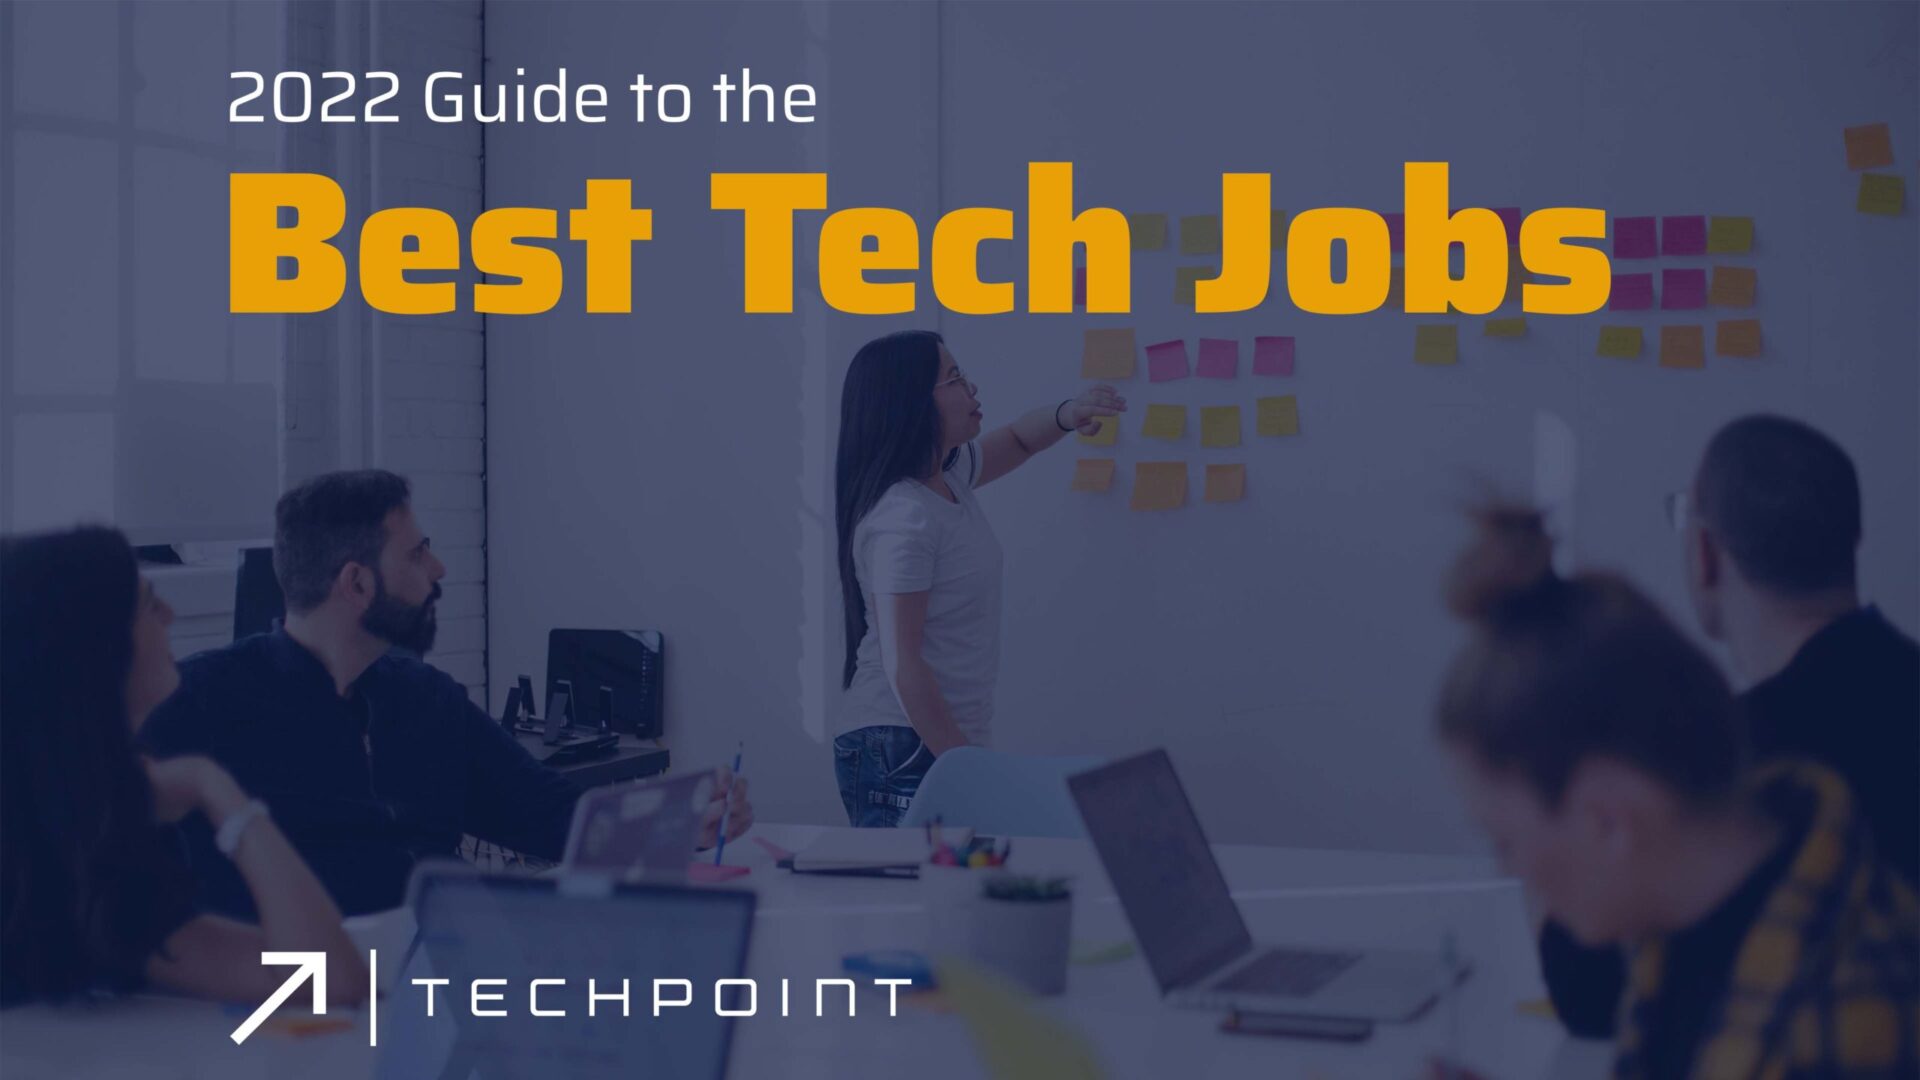 2022 Guide to the Best Tech Jobs for the Future